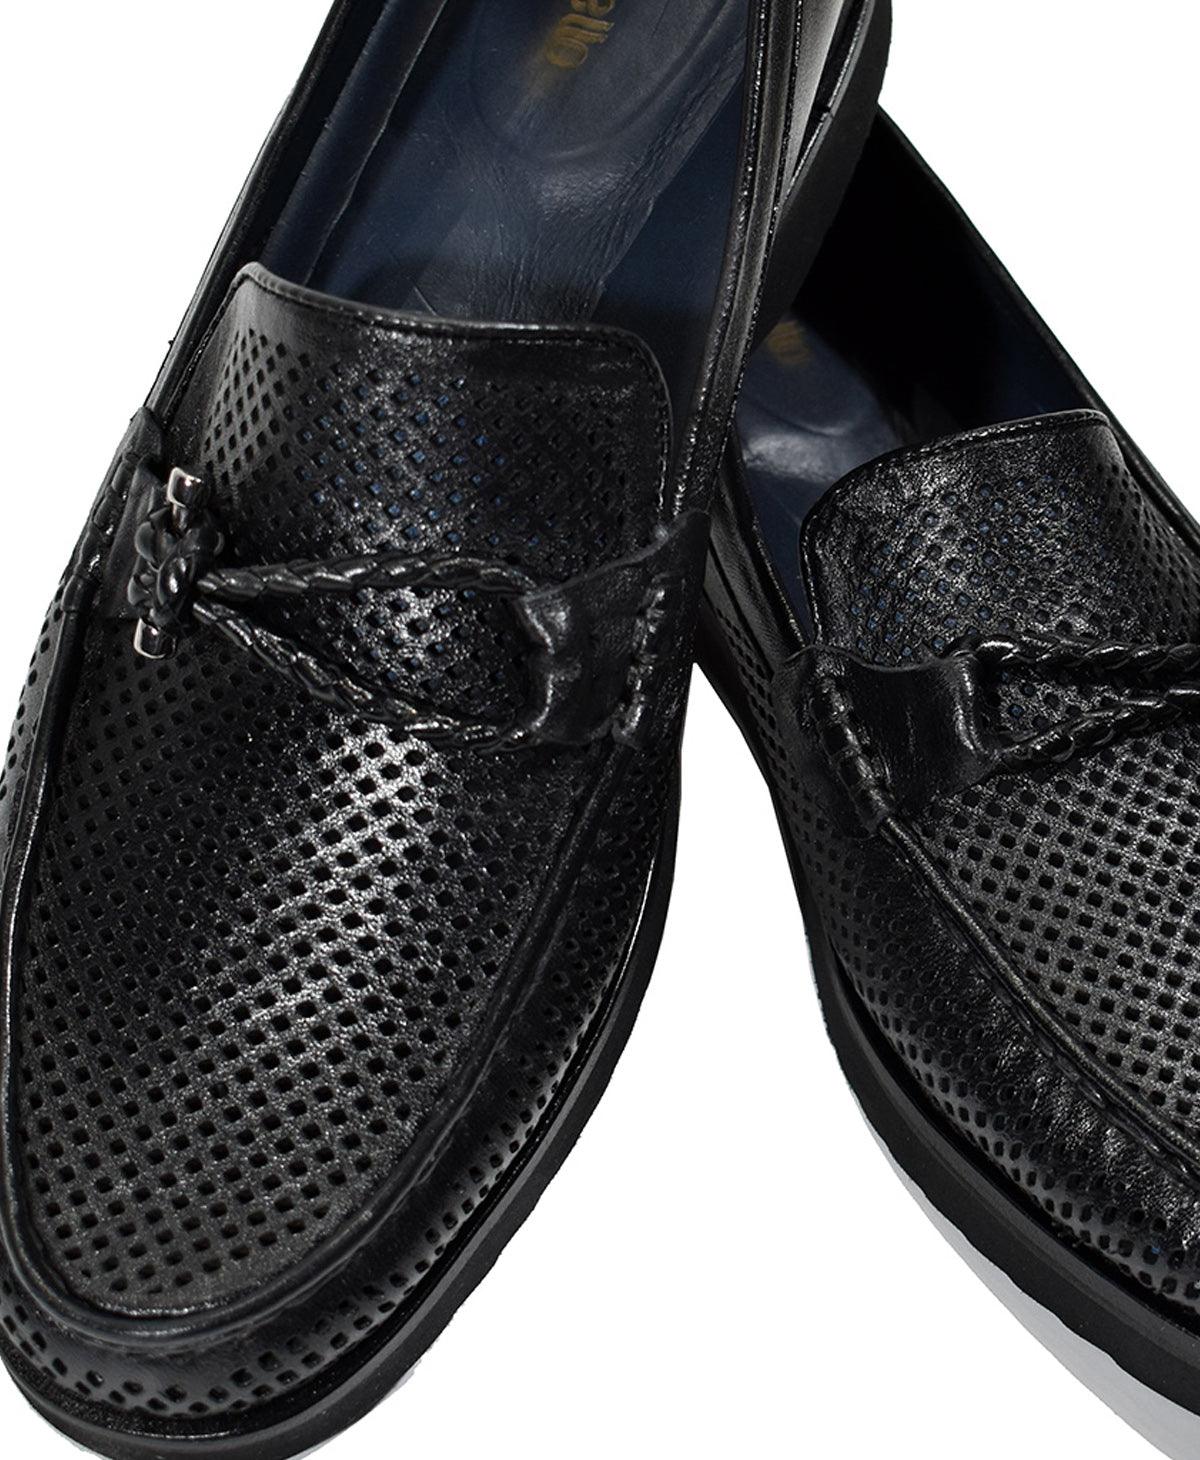 Marcello Black Perforated Leather Shoes Soft perforated leather in black. Sharp trim details. Unique braid accessory. Rubber sole. Sizes 8-12, including half sizes. Classic fit. Shoe by Marcello.